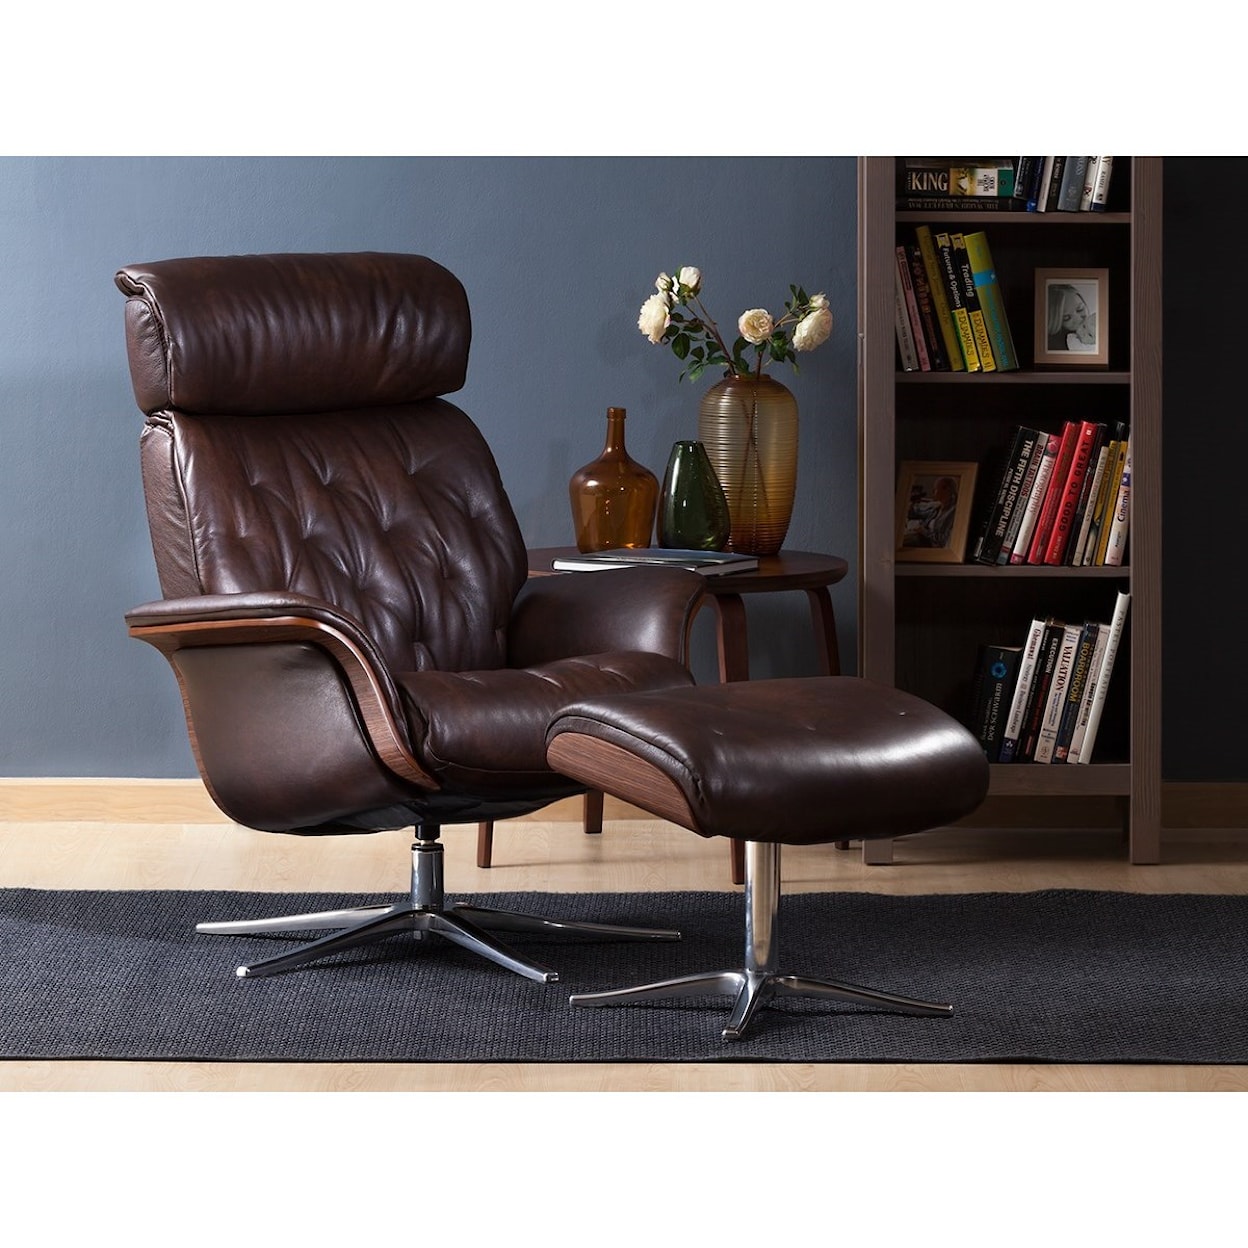 IMG Norway Space Recliner with Ottoman